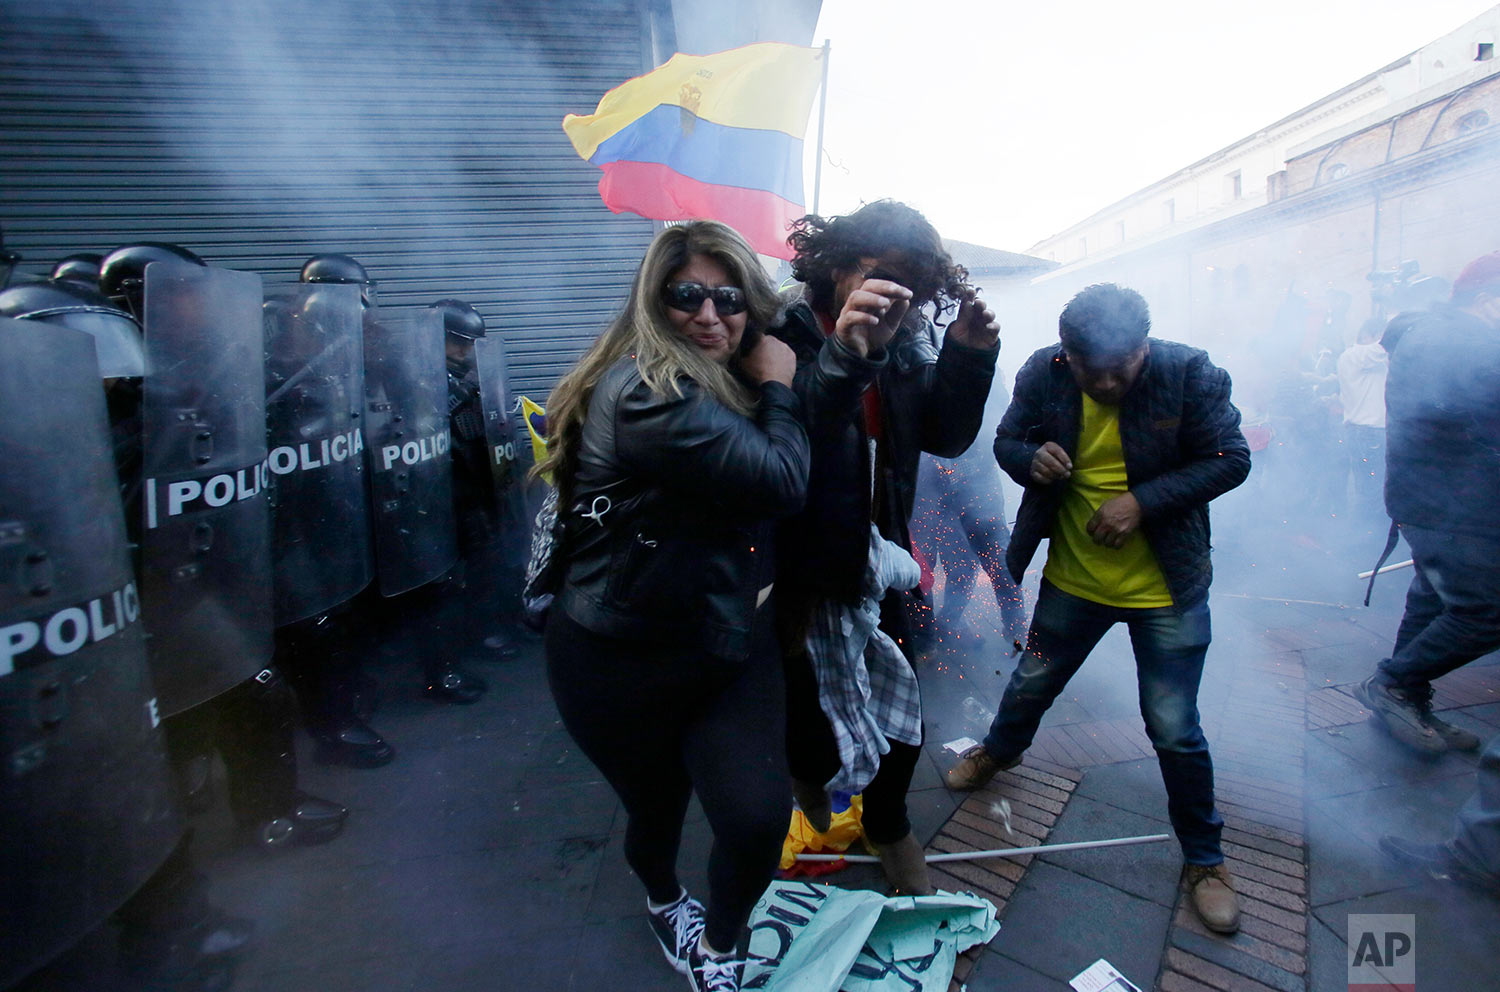  Supporters of Ecuador's former President Rafael Correa clash with police near the government palace during a rally in support of Correa after a judge ordered him jailed for failing to appear in court as required as part of a kidnapping probe, in Quito, Ecuador, July 5, 2018. (AP Photo/Dolores Ochoa) 